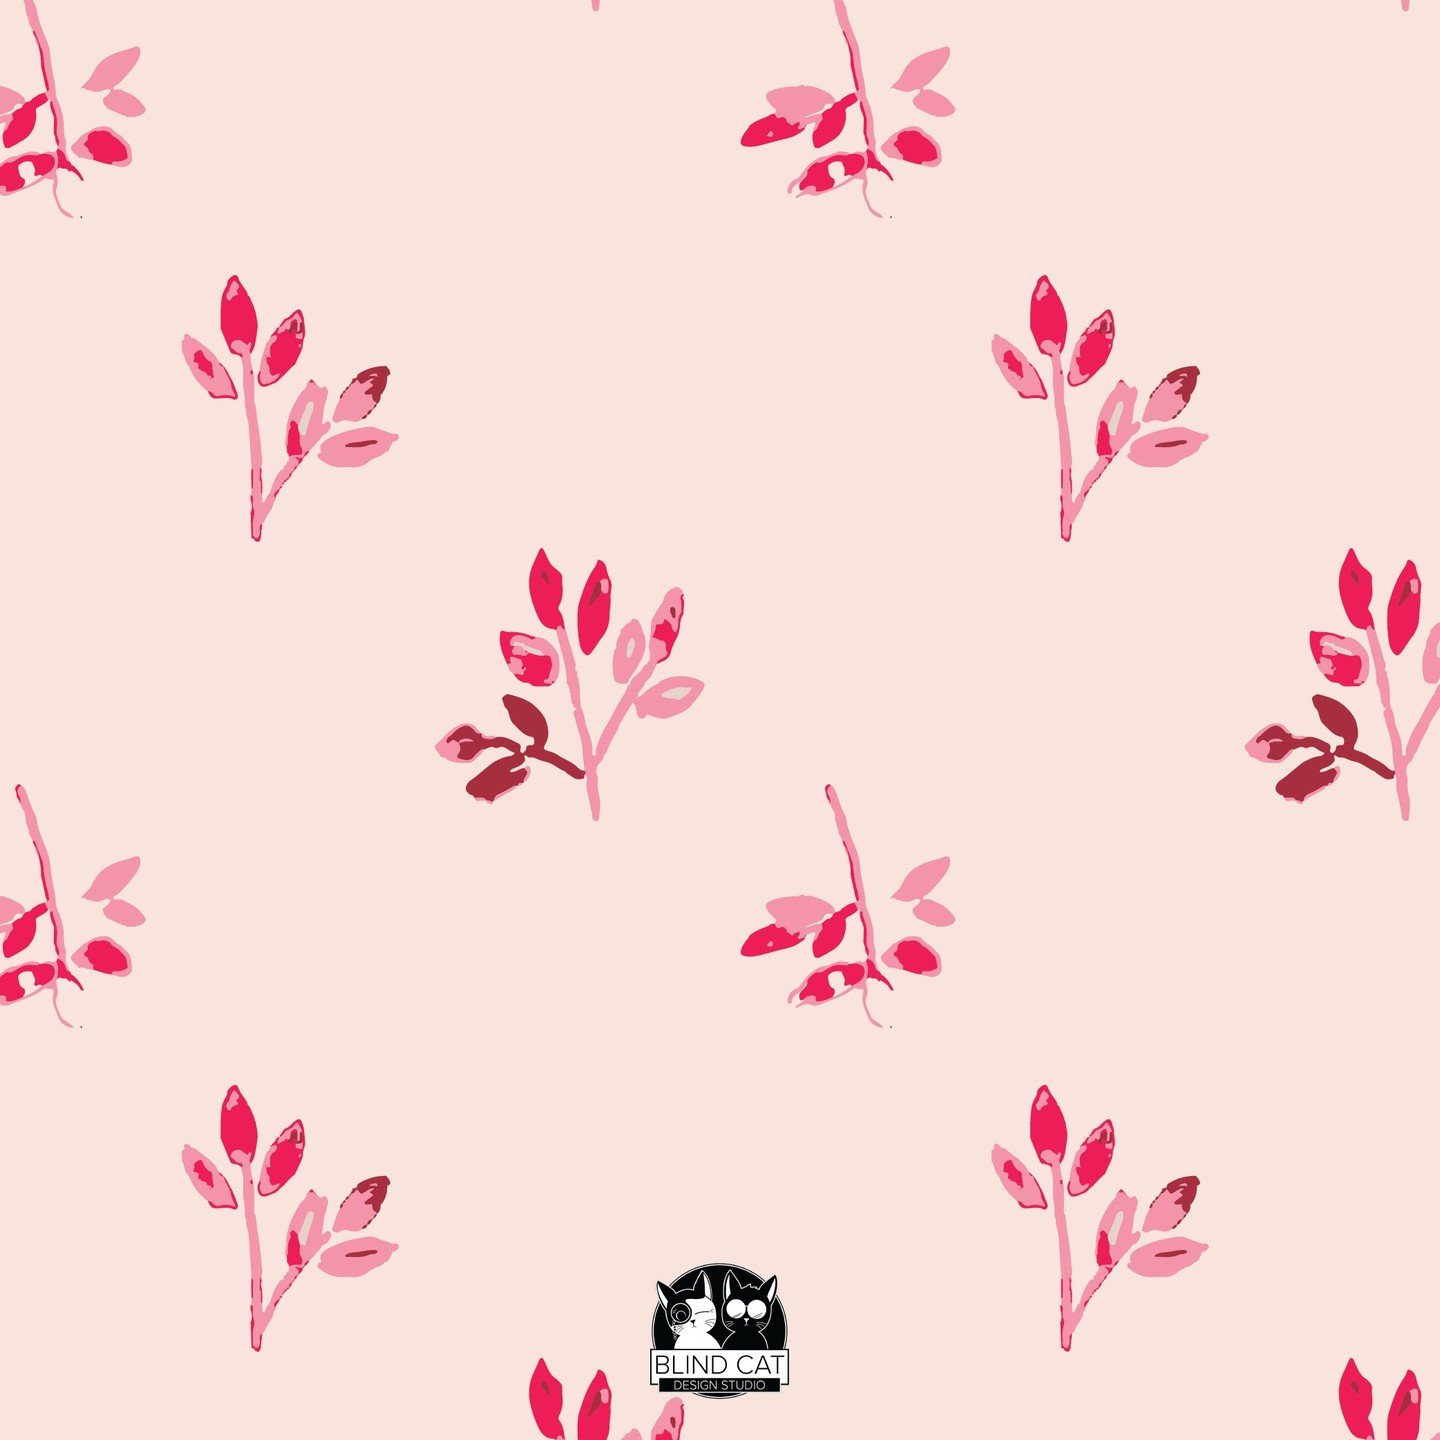 This simple pattern is called Charm
.
.
.
.
.
#surfacepattern #patterndesign #surfacepatterndesign #blindcatdesign #surfacedesign #pattern #textiledesign #patterndesigner #surfacepatterndesigner #printandpattern #surfacepatterncommunity #fabricdesign